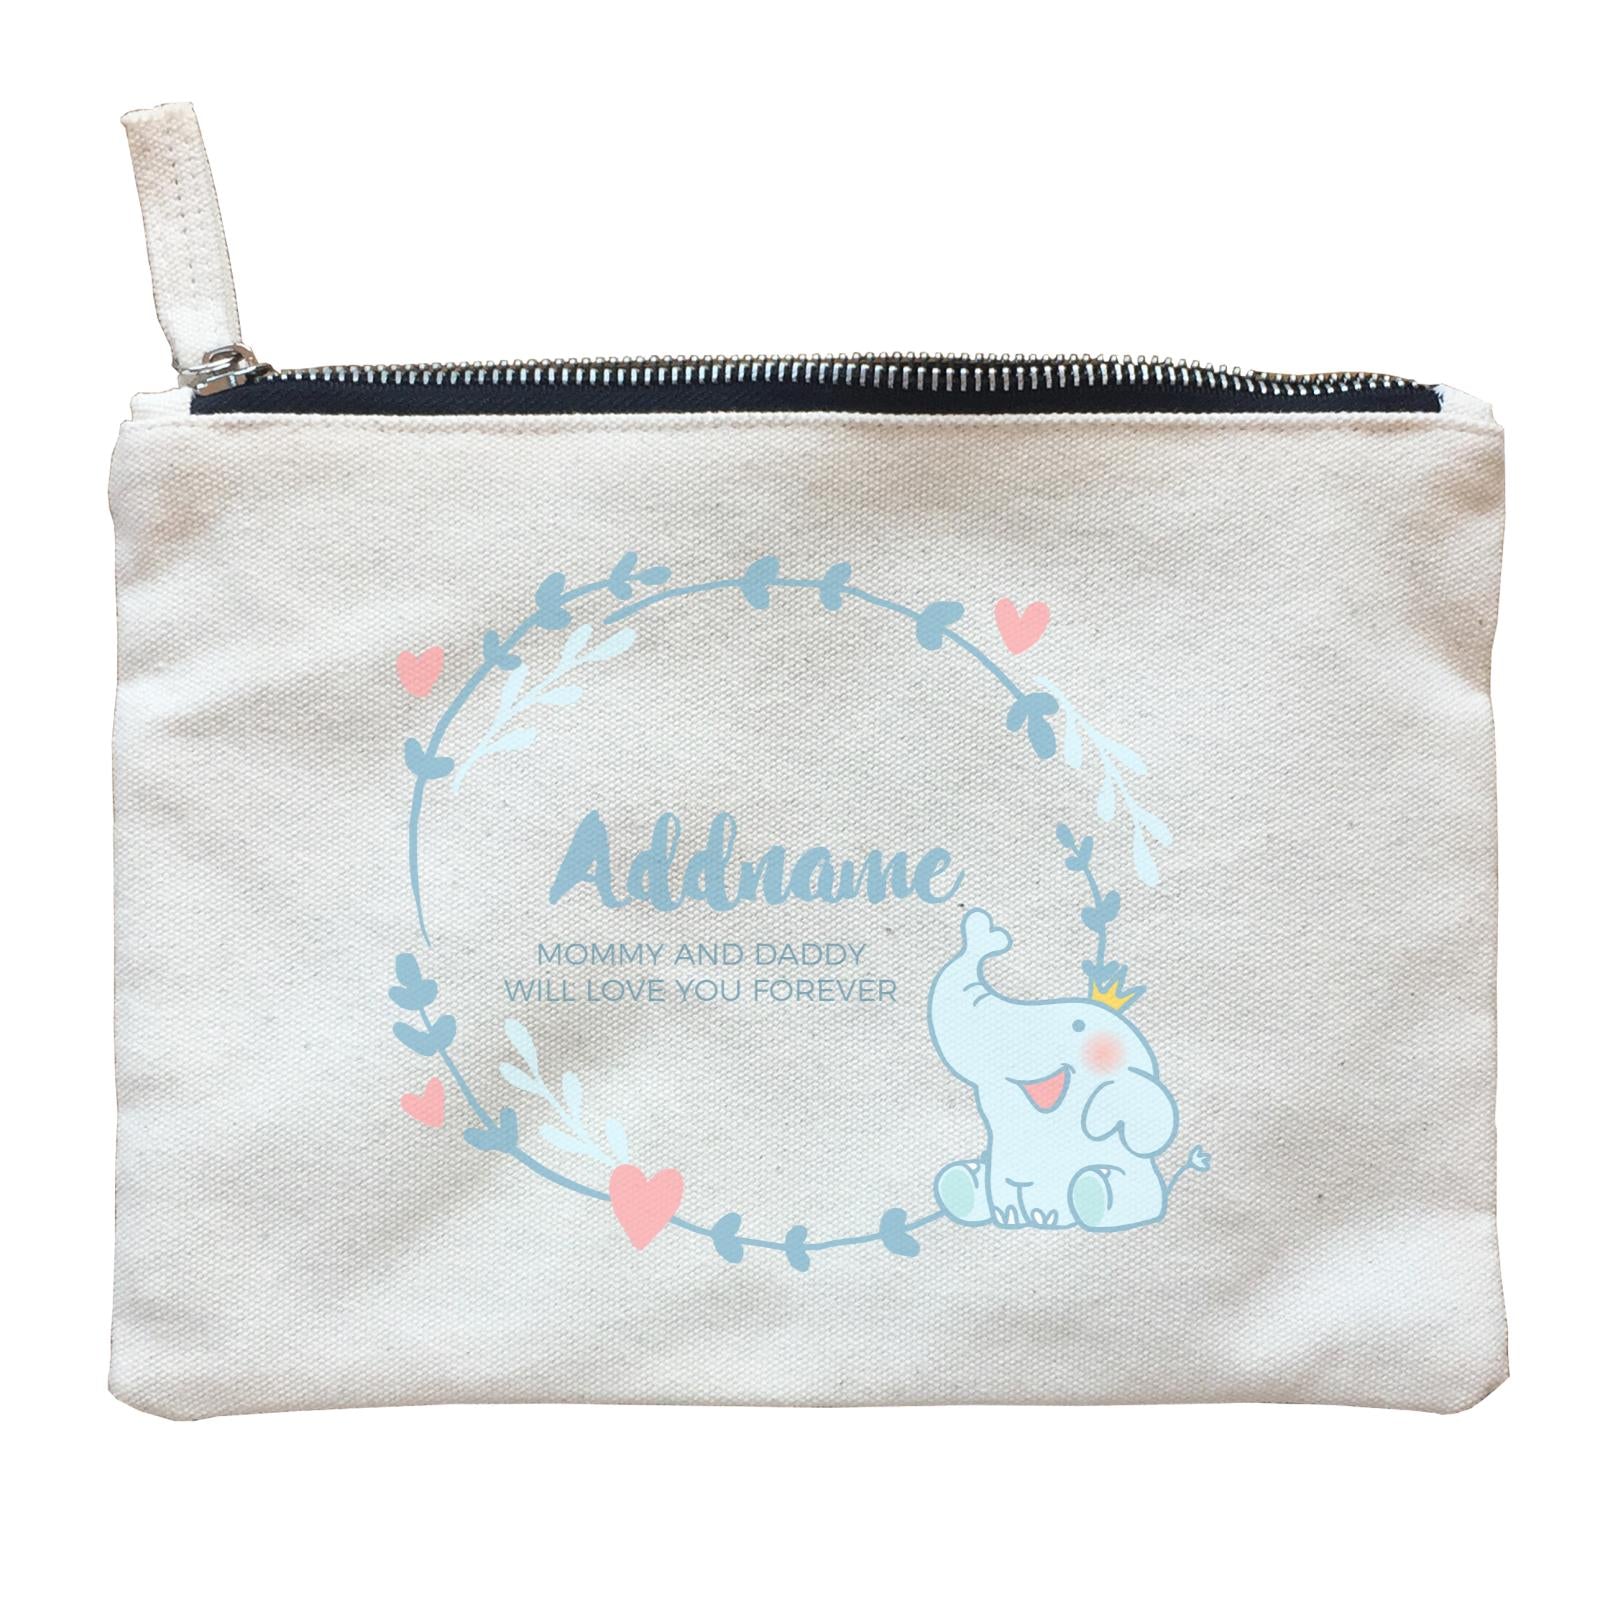 Cute Baby Blue Elephant Prince Personalizable with Name and Text Zipper Pouch